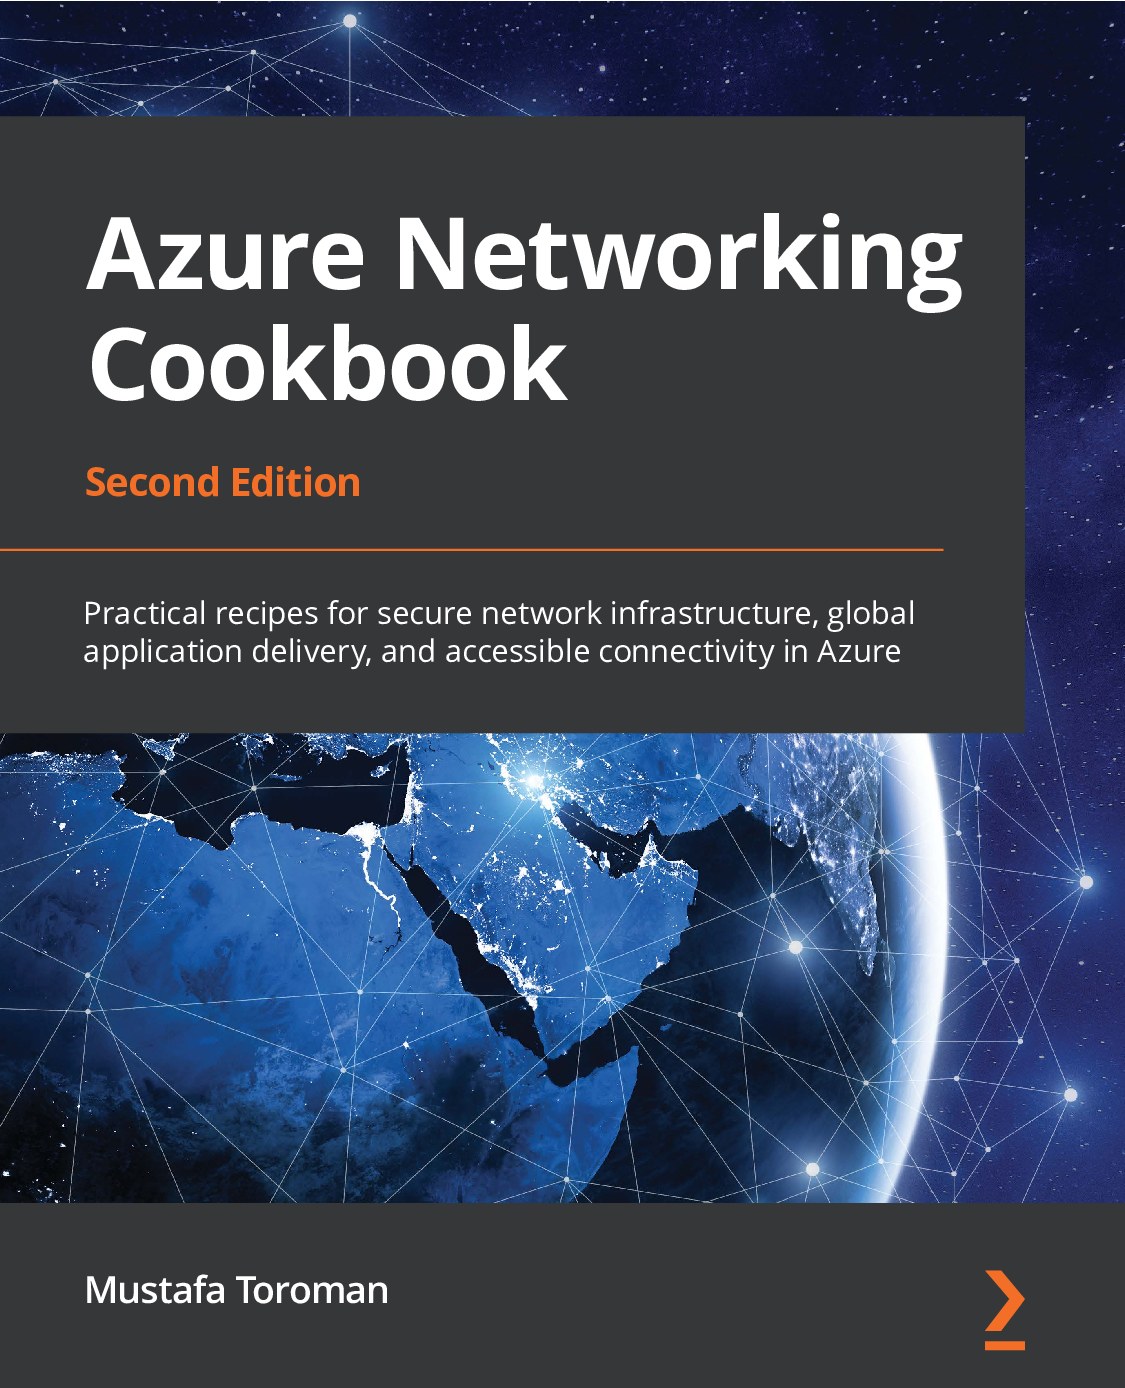 Azure Networking Cookbook, Second Edition